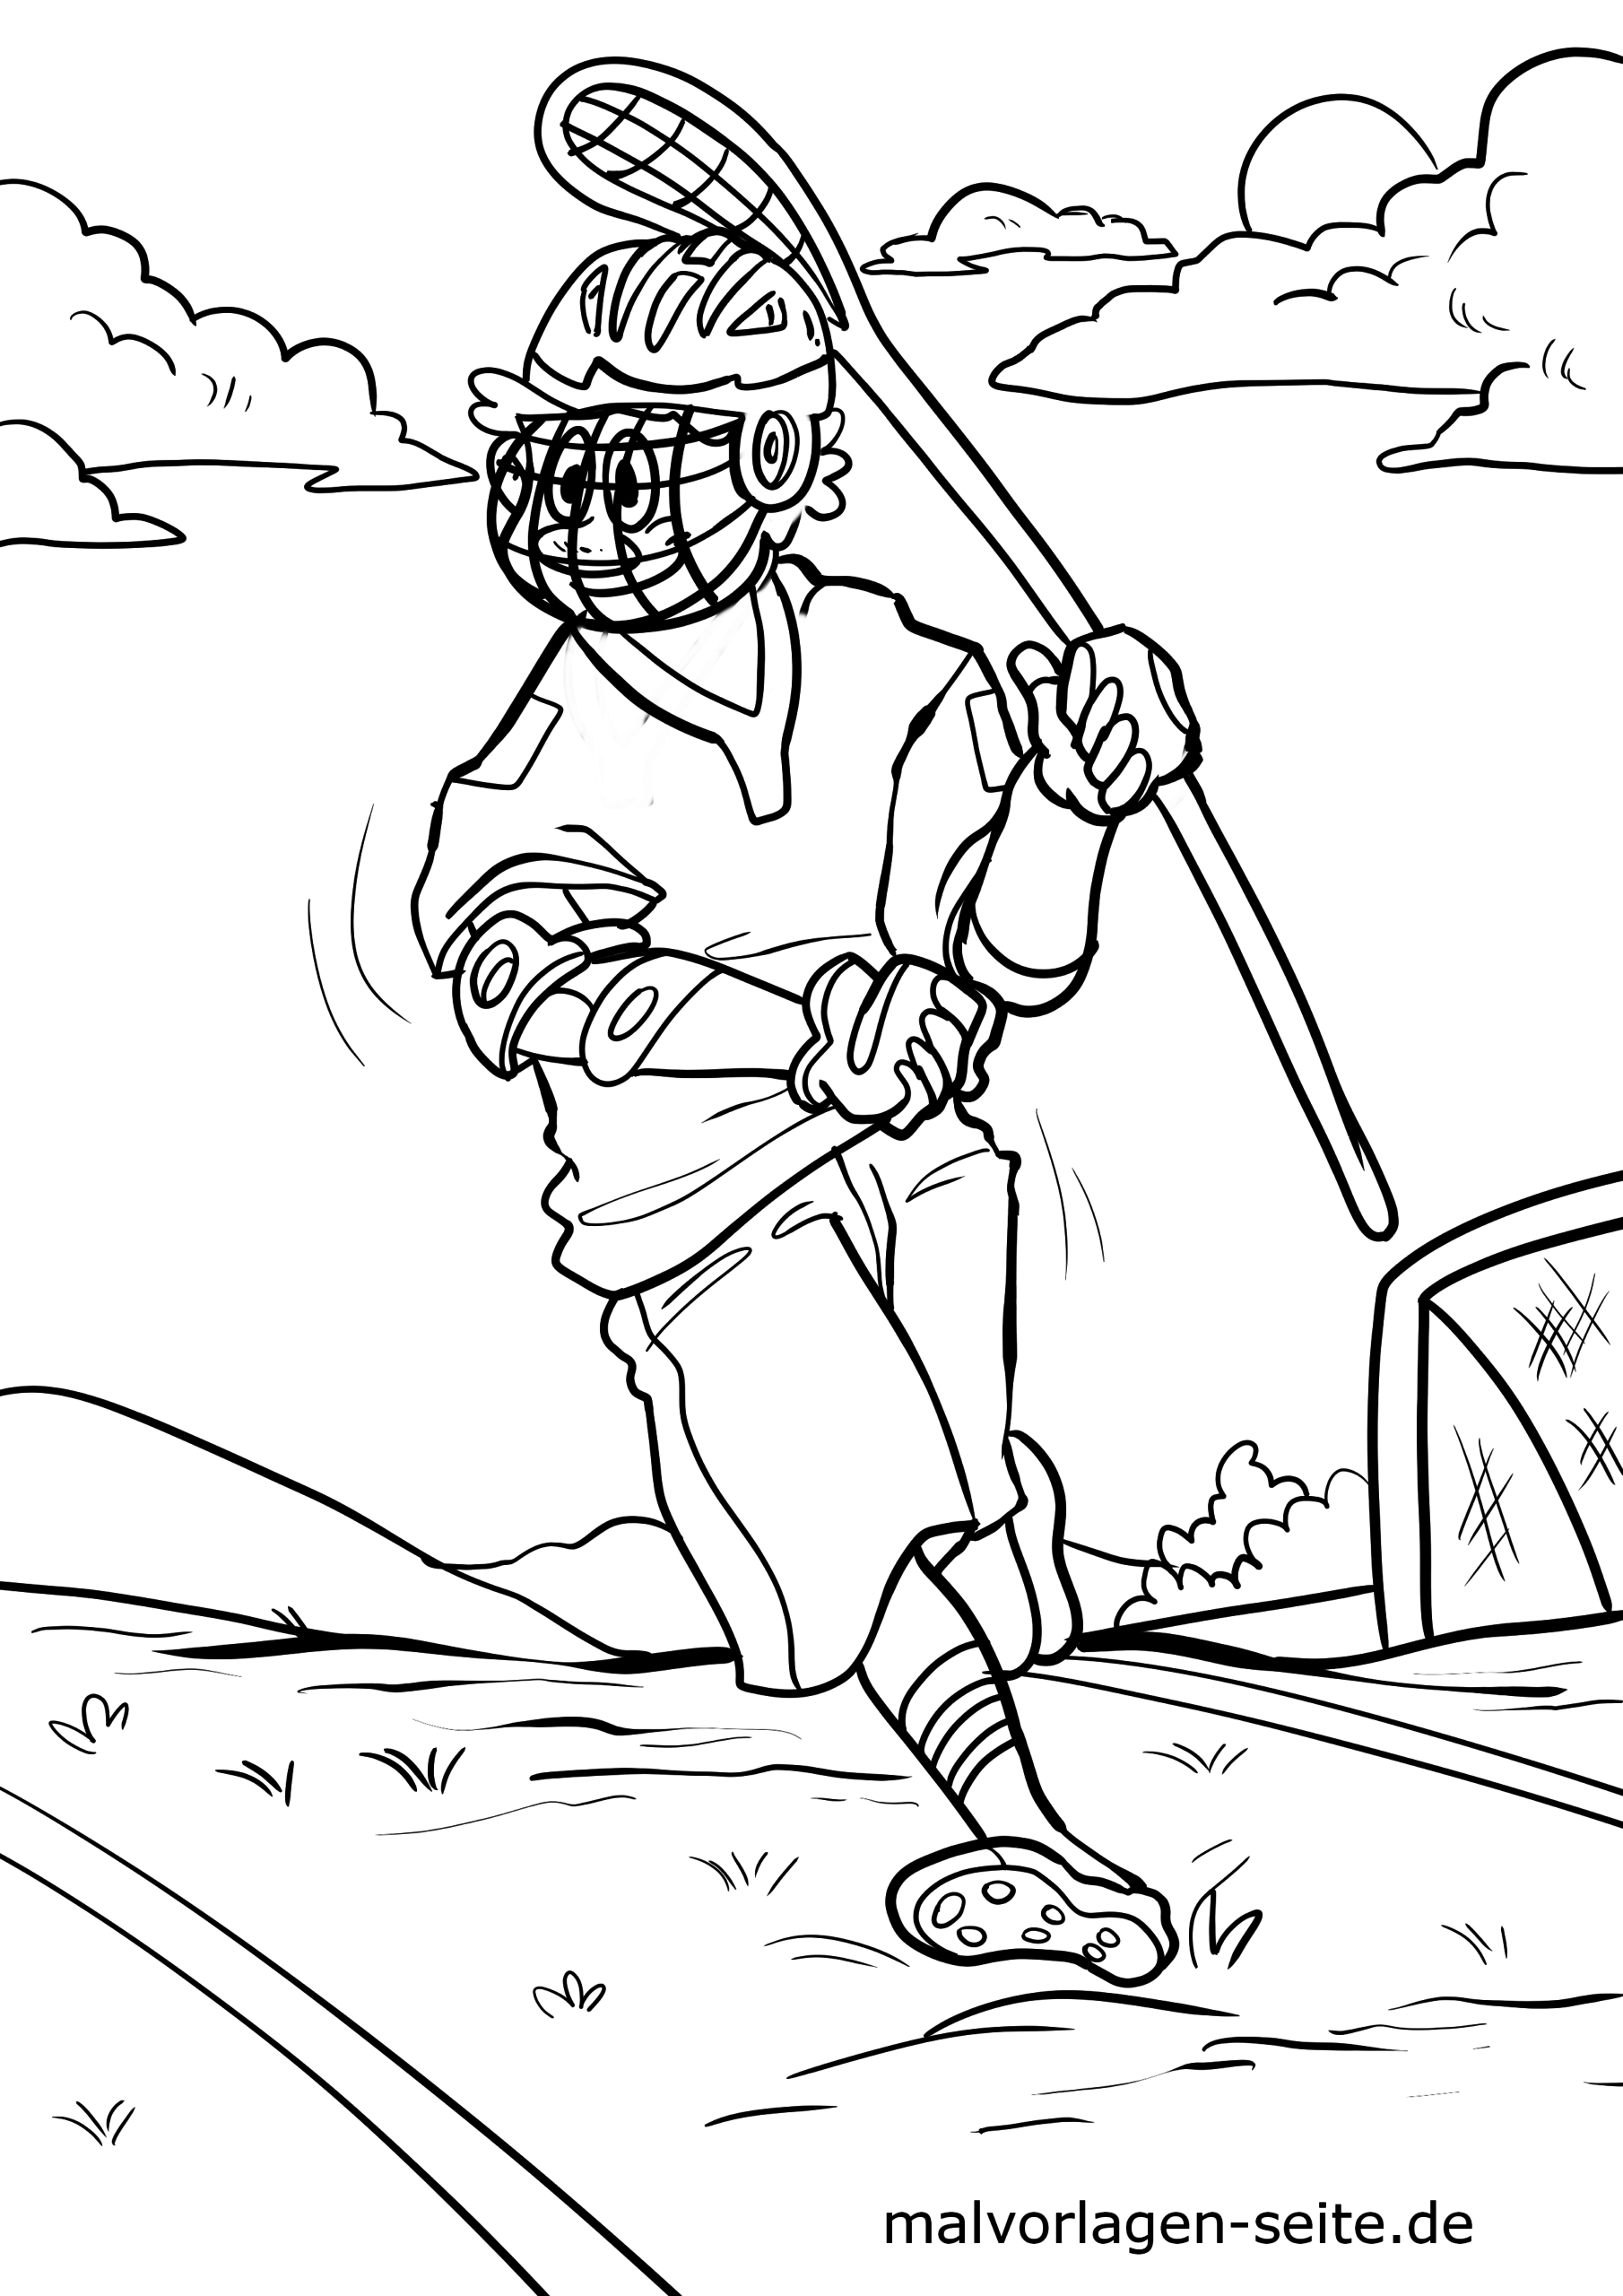 Coloring page lacrosse Sports coloring page download free